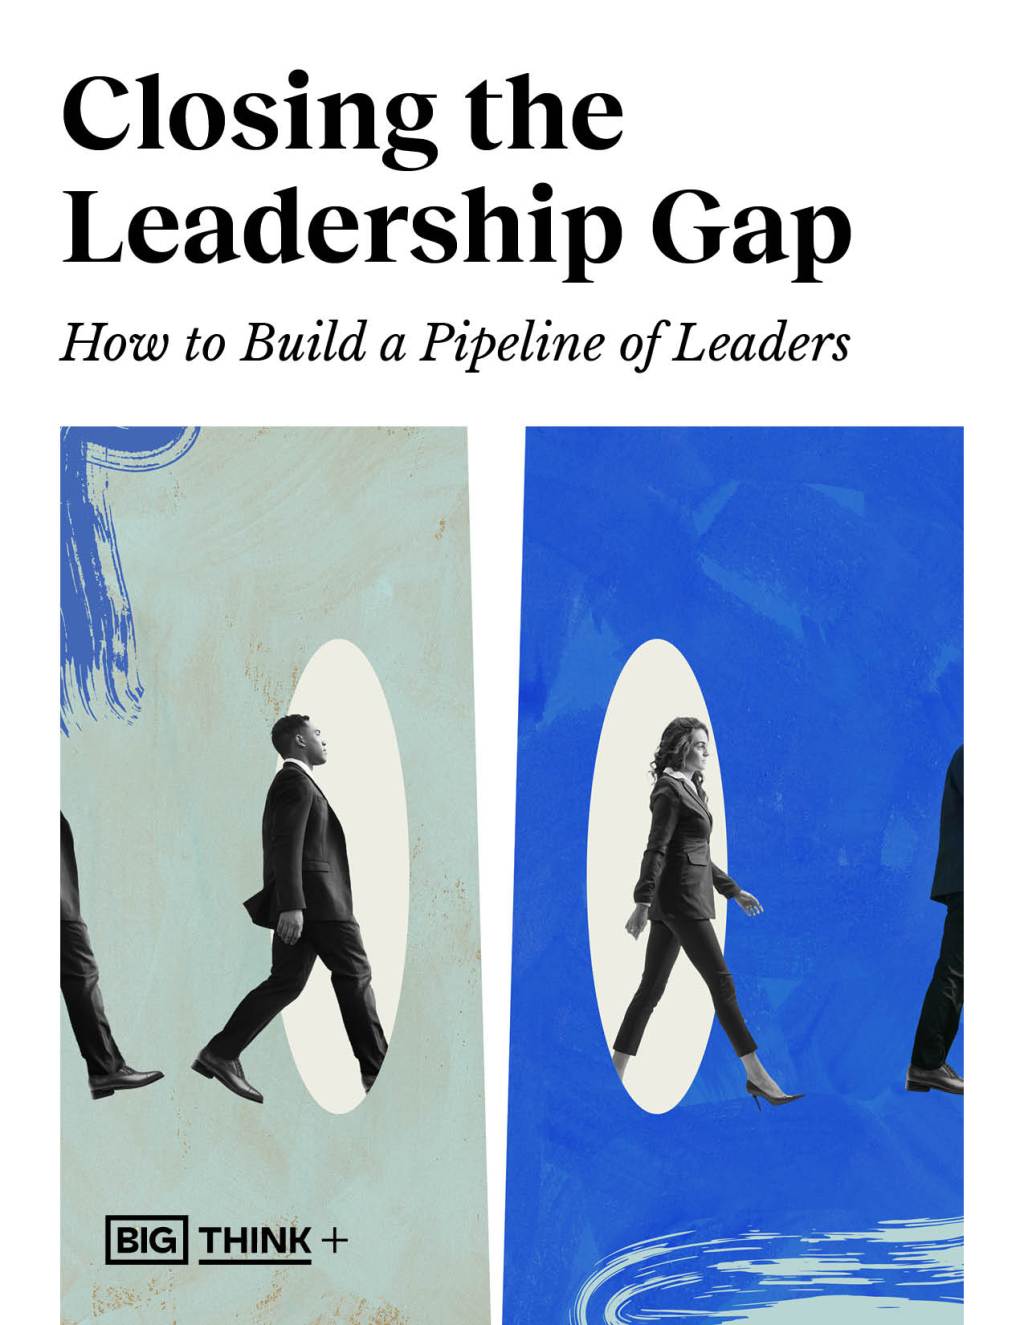 Closing the leadership gap how to build a pipeline of leaders.